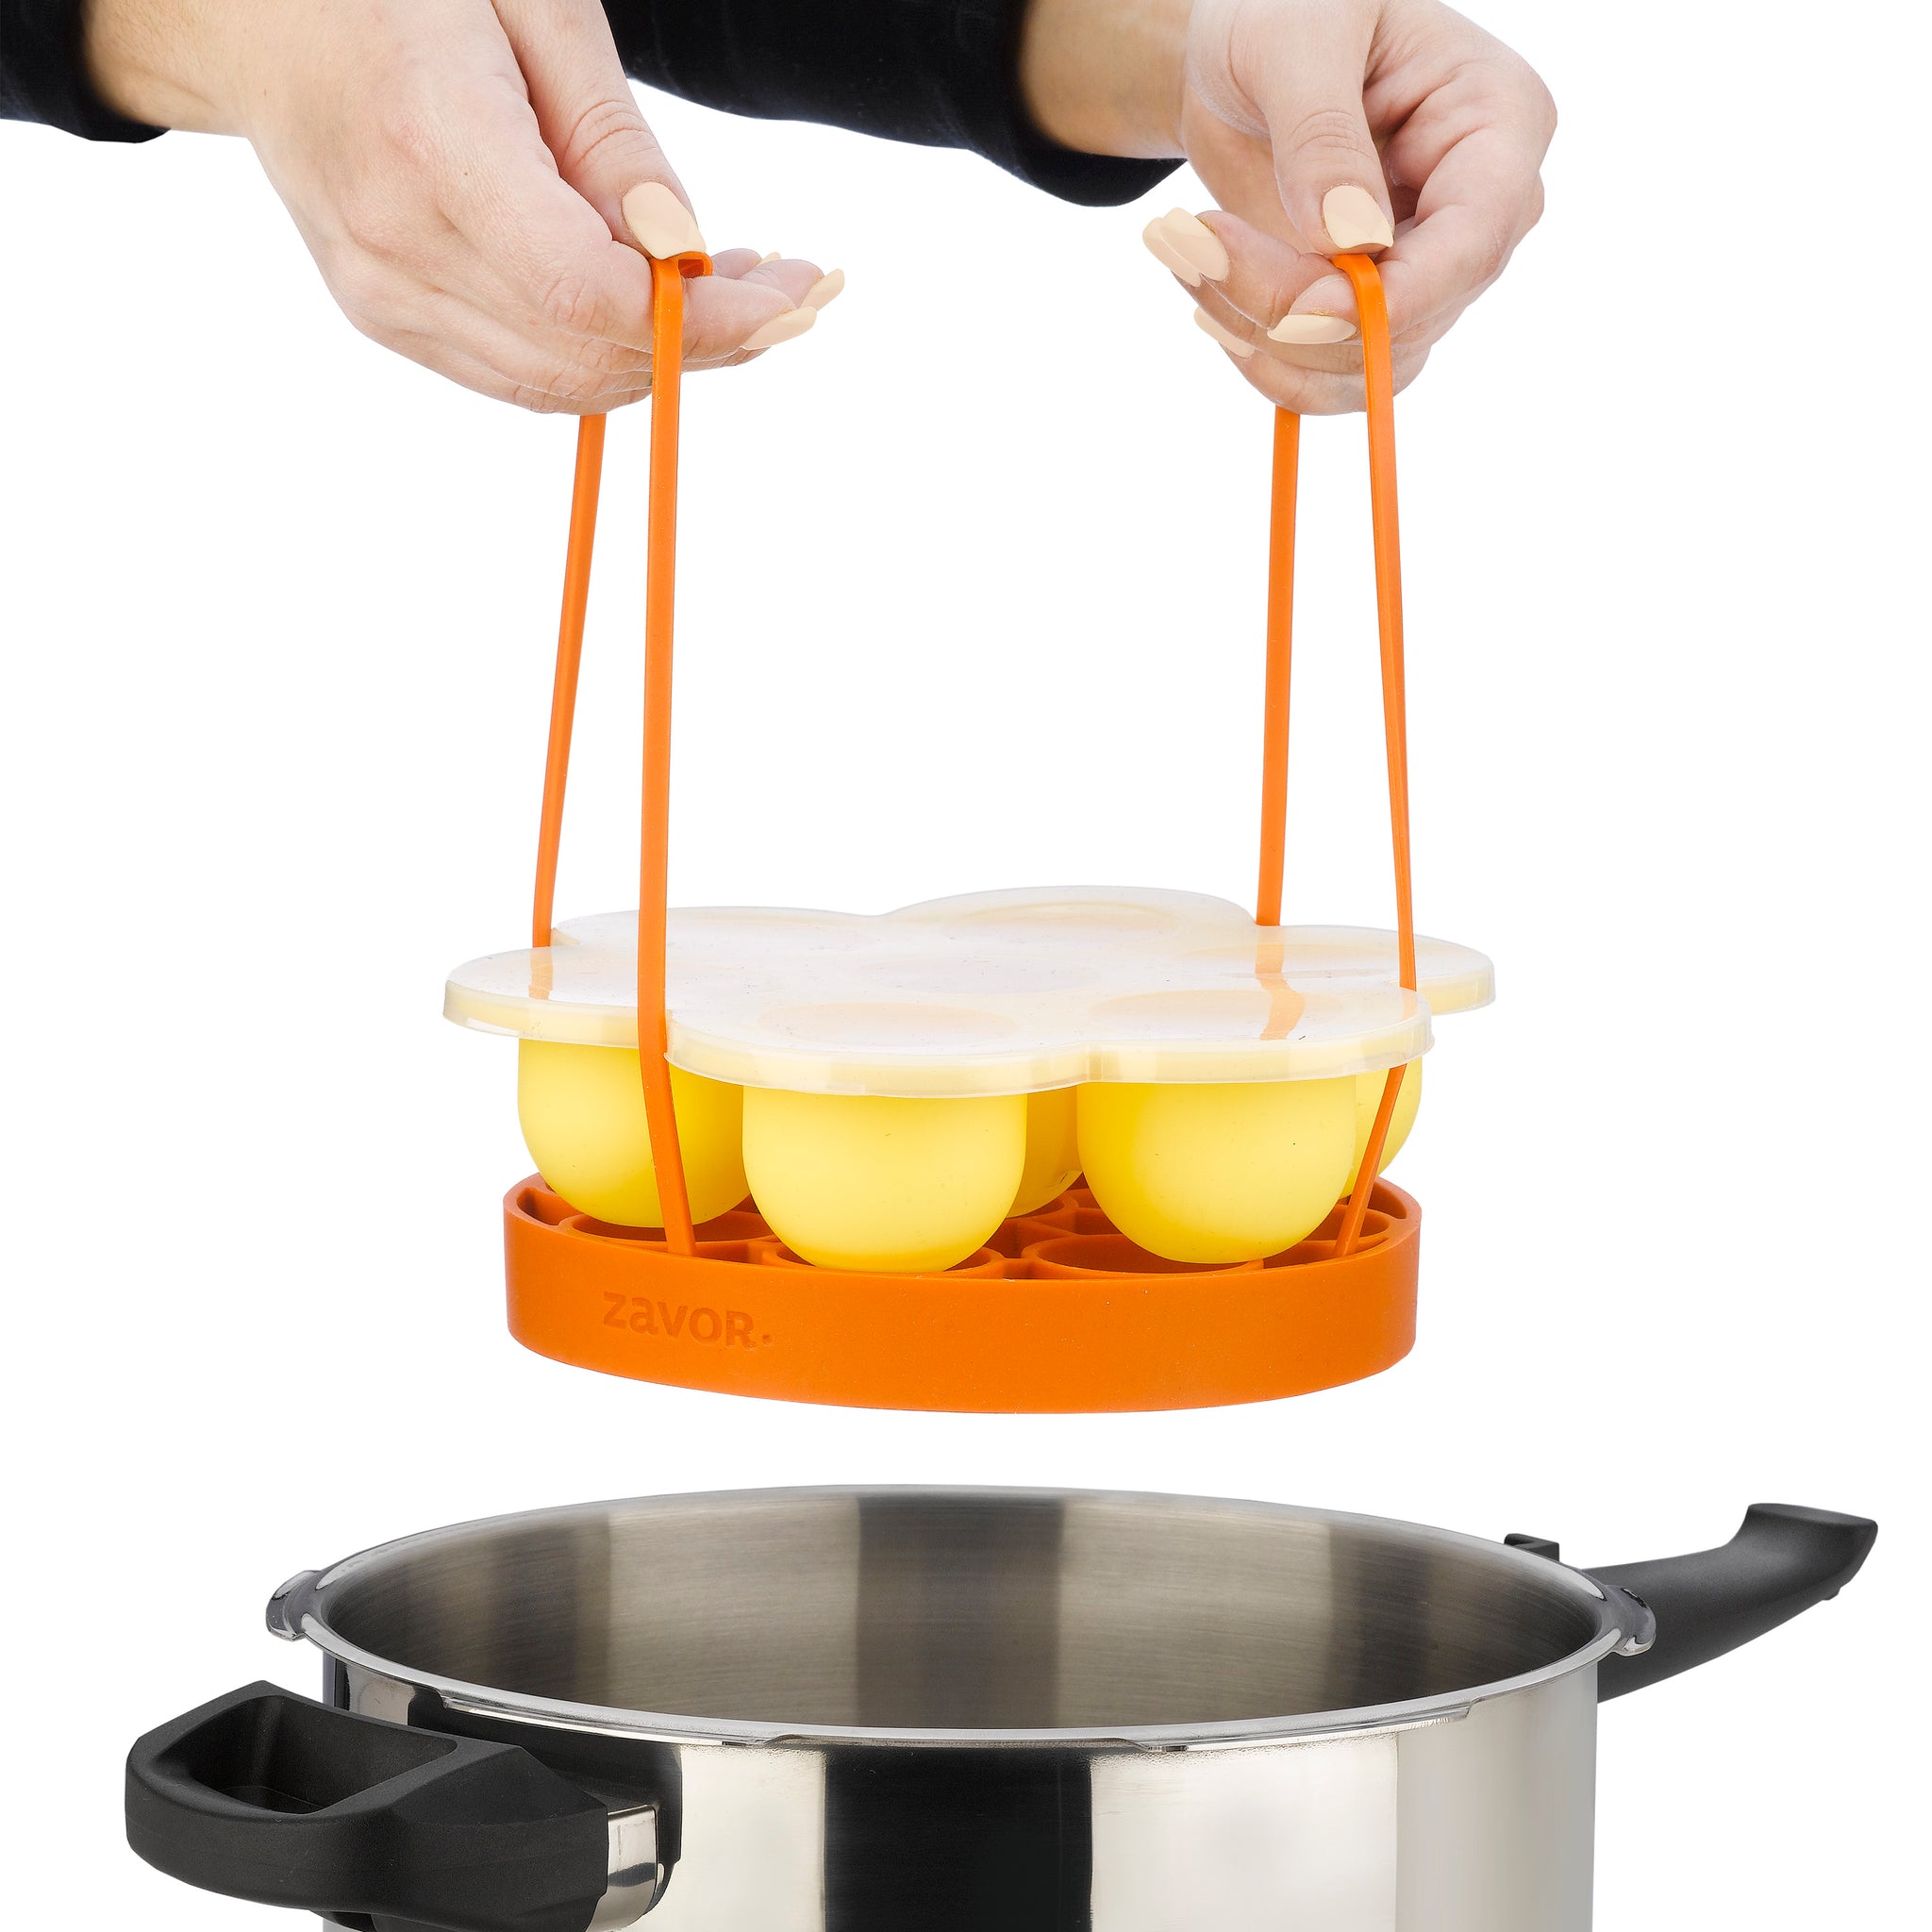 Silicone Egg Bites Mold Set of 4, Steamer Rack with Heat resistant Handle  and Spoon,Reusable Sous Vide Egg Poacher with Lid Fits Instant Pot 5,6,8 qt